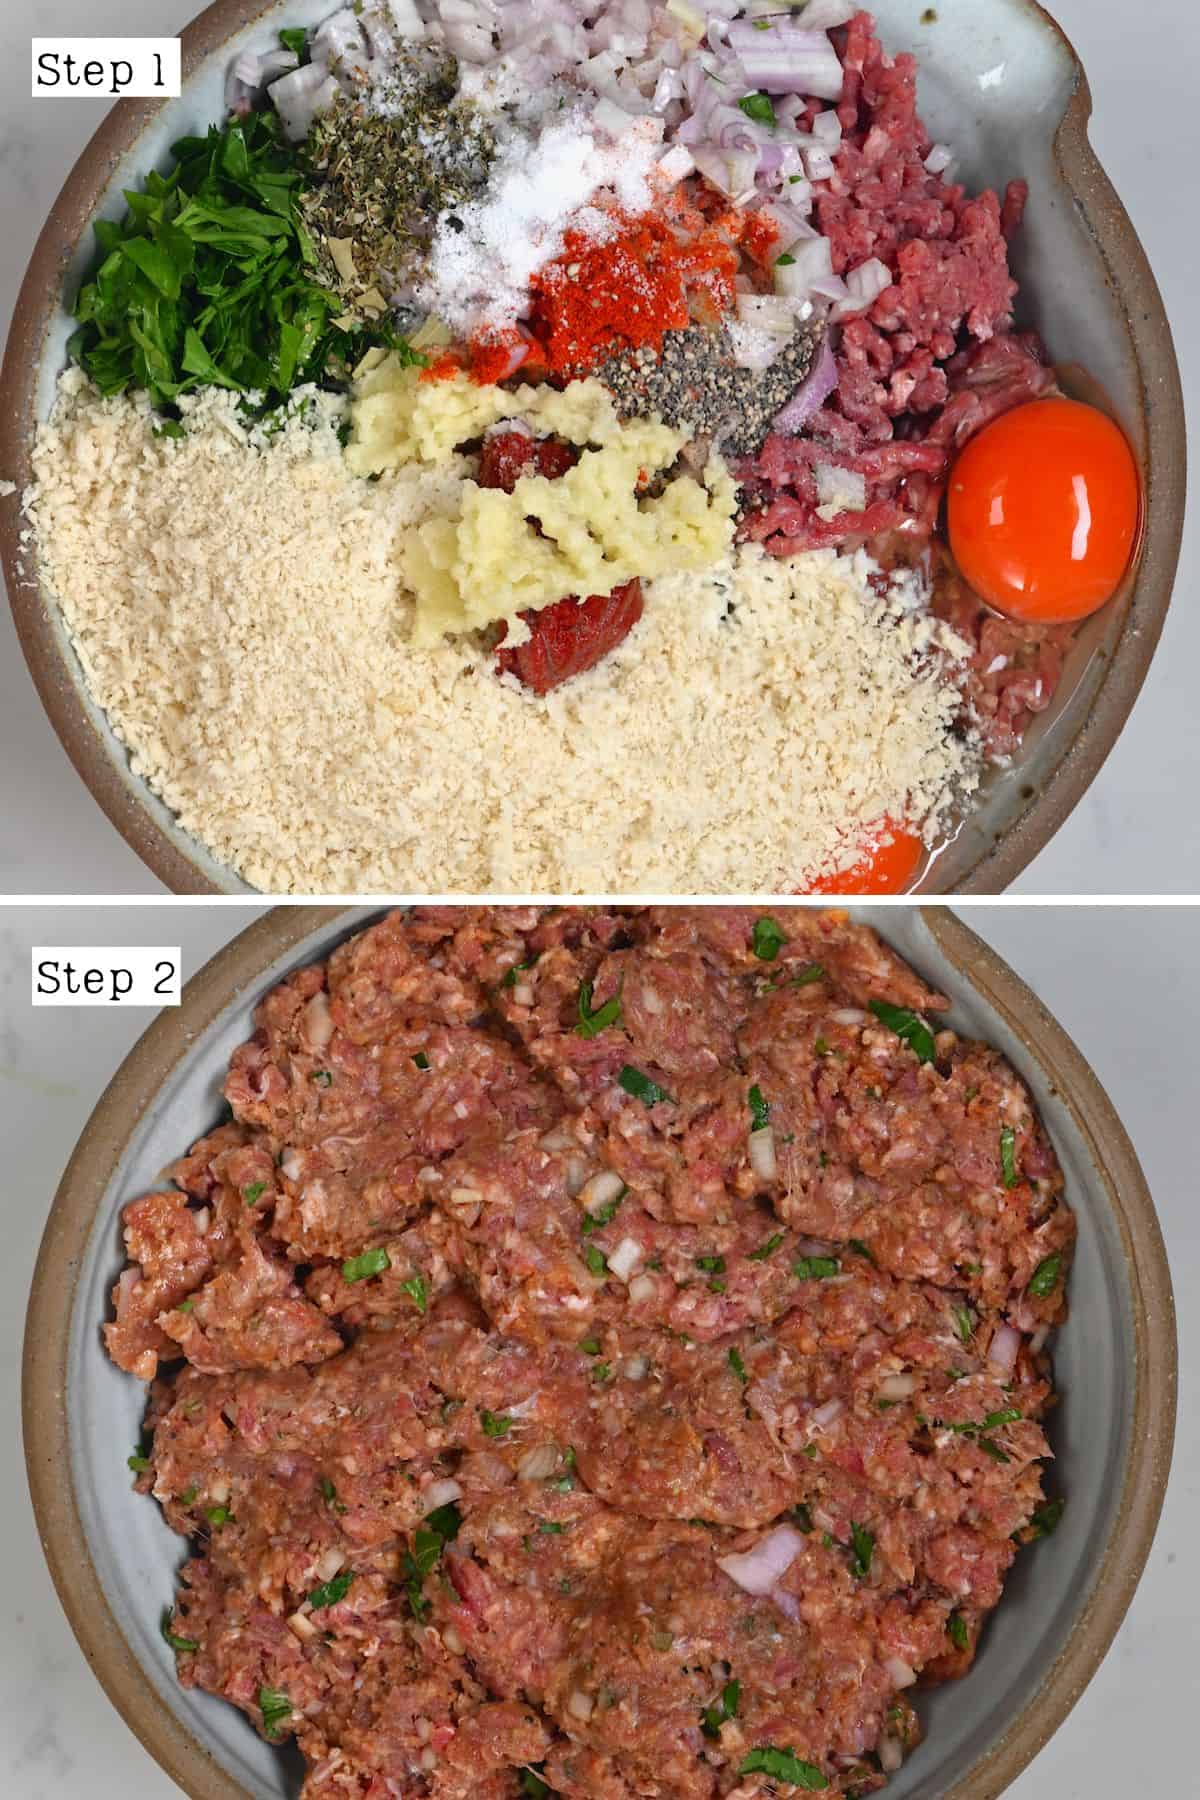 Steps for mixing meatloaf ingredients in a bowl